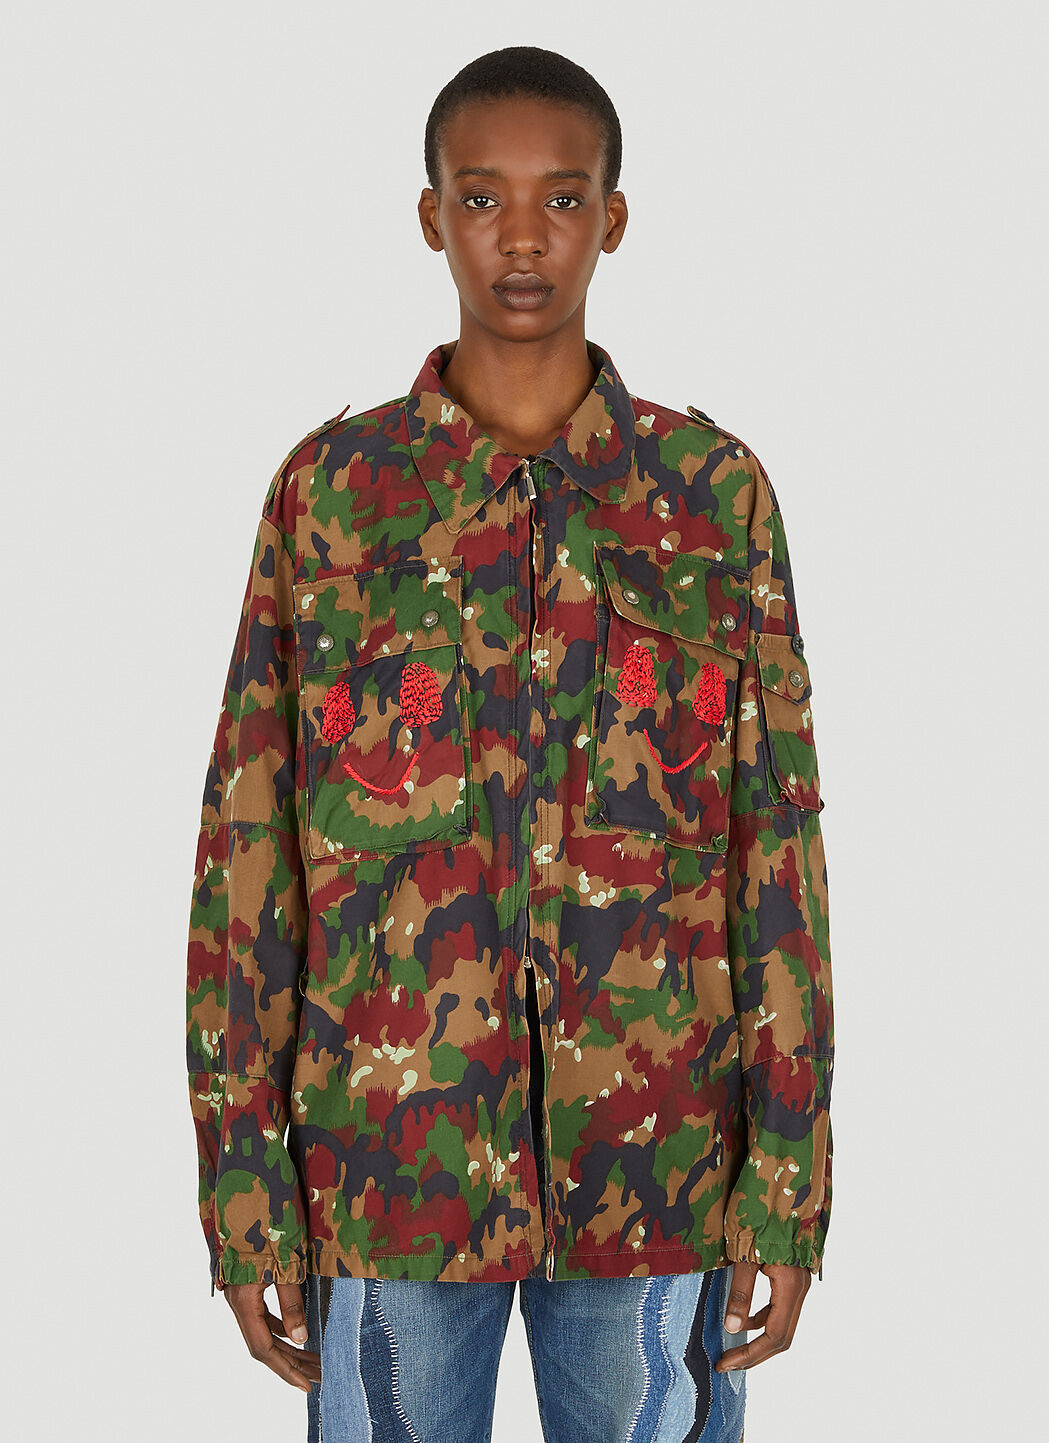 DRx FARMAxY FOR LN-CC Embroidered Military Jacket 黑色 drx0347011